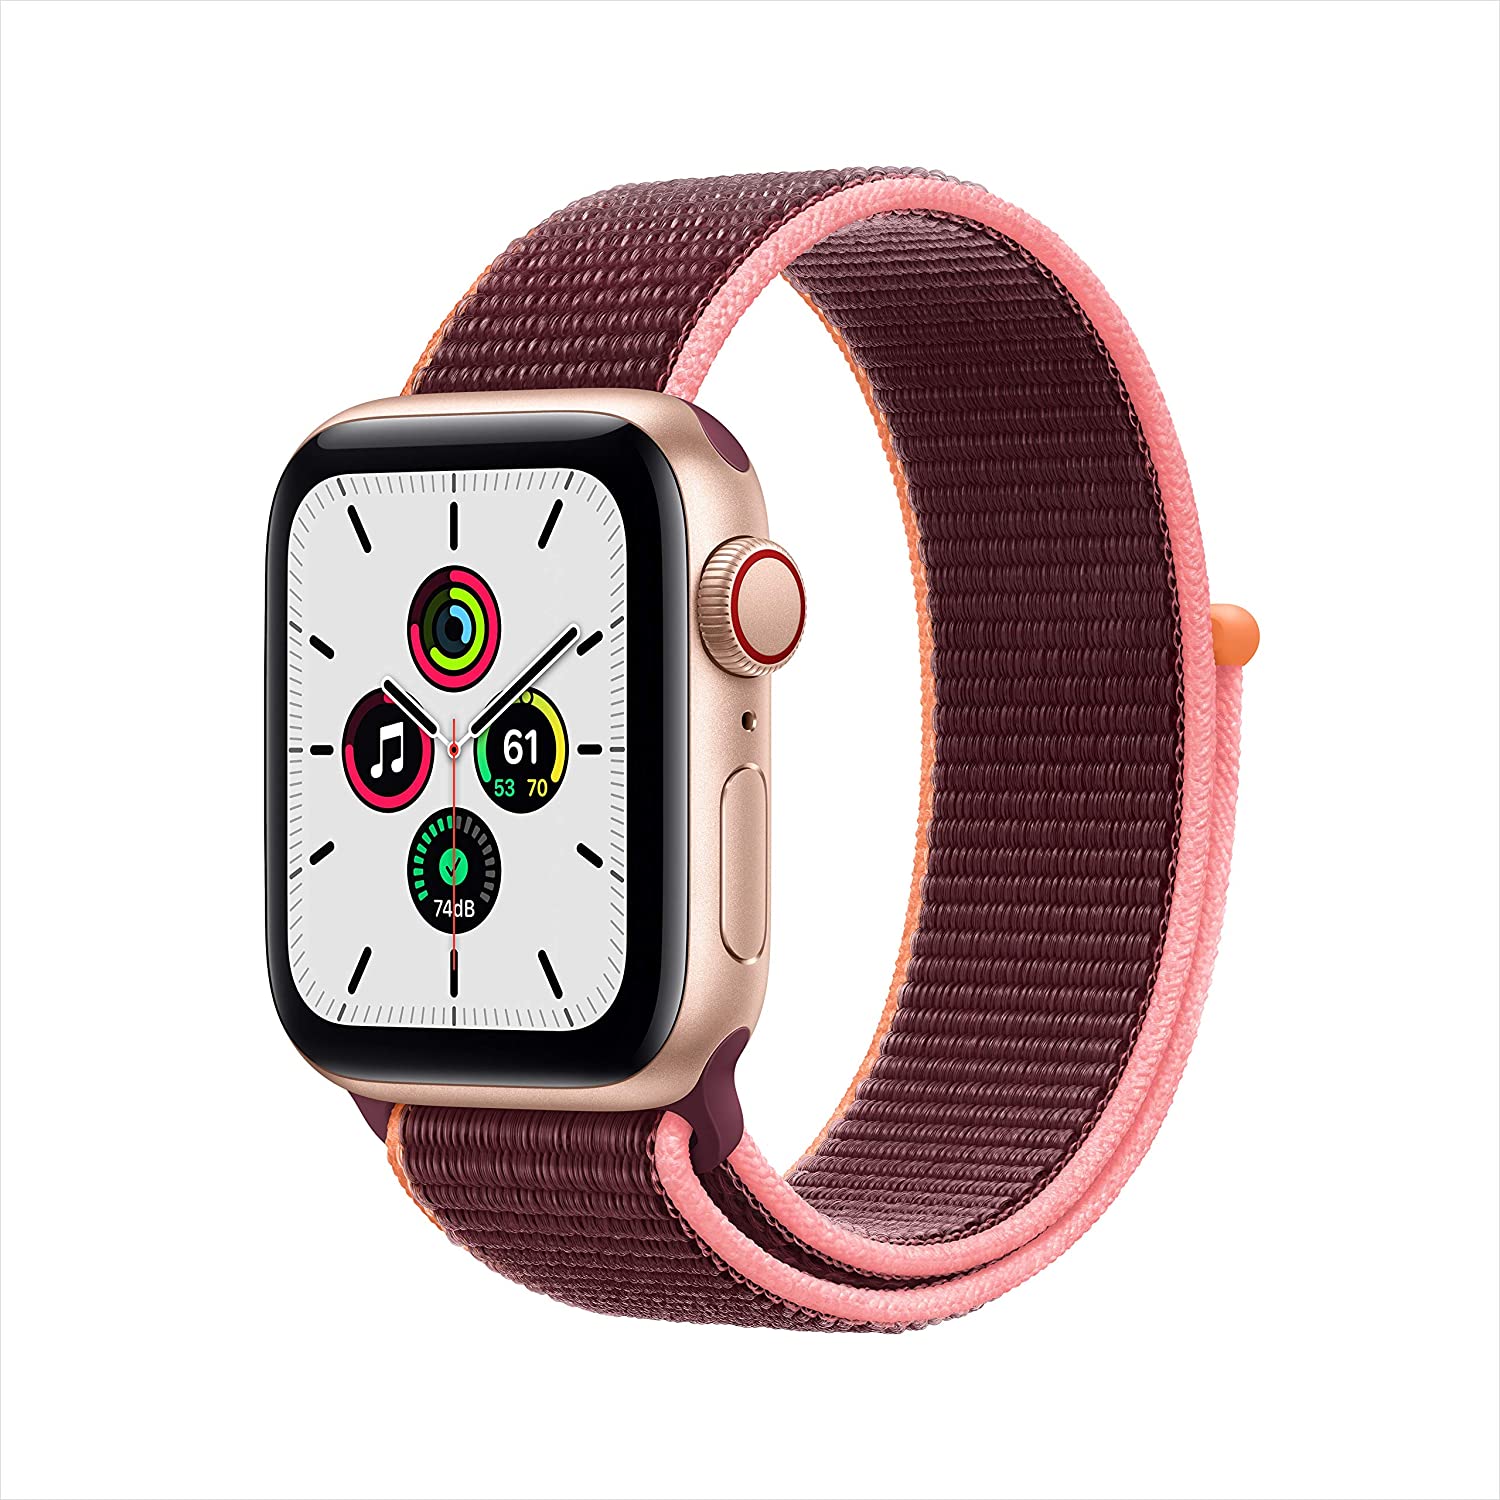 Apple Watch SE (40mm) (Cellular) Specifications